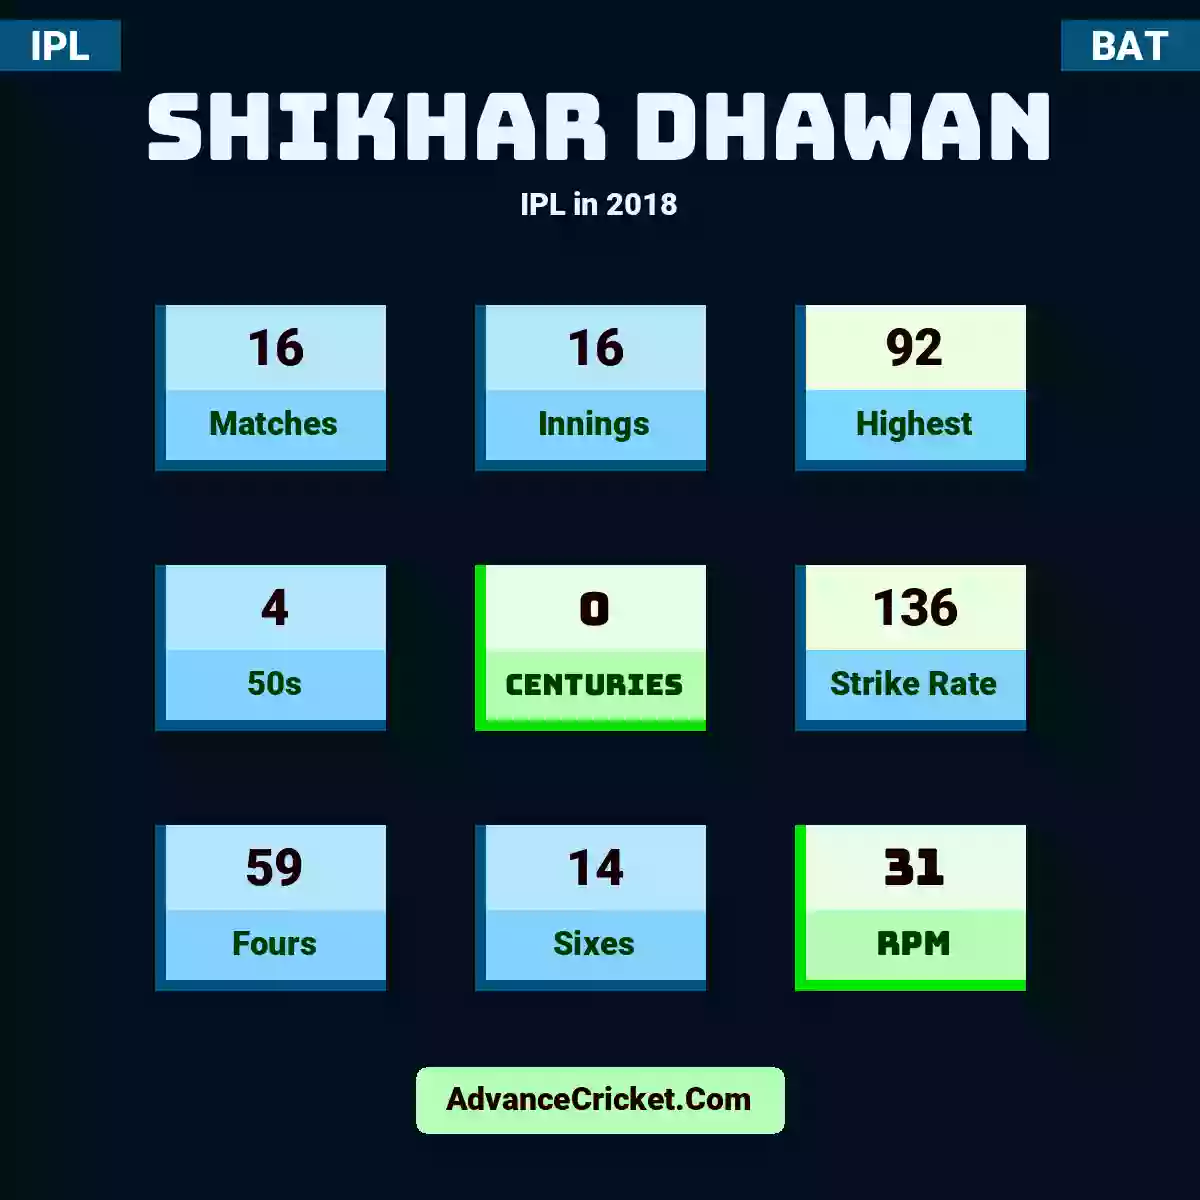 Shikhar Dhawan IPL  in 2018, Shikhar Dhawan played 16 matches, scored 92 runs as highest, 4 half-centuries, and 0 centuries, with a strike rate of 136. S.Dhawan hit 59 fours and 14 sixes, with an RPM of 31.